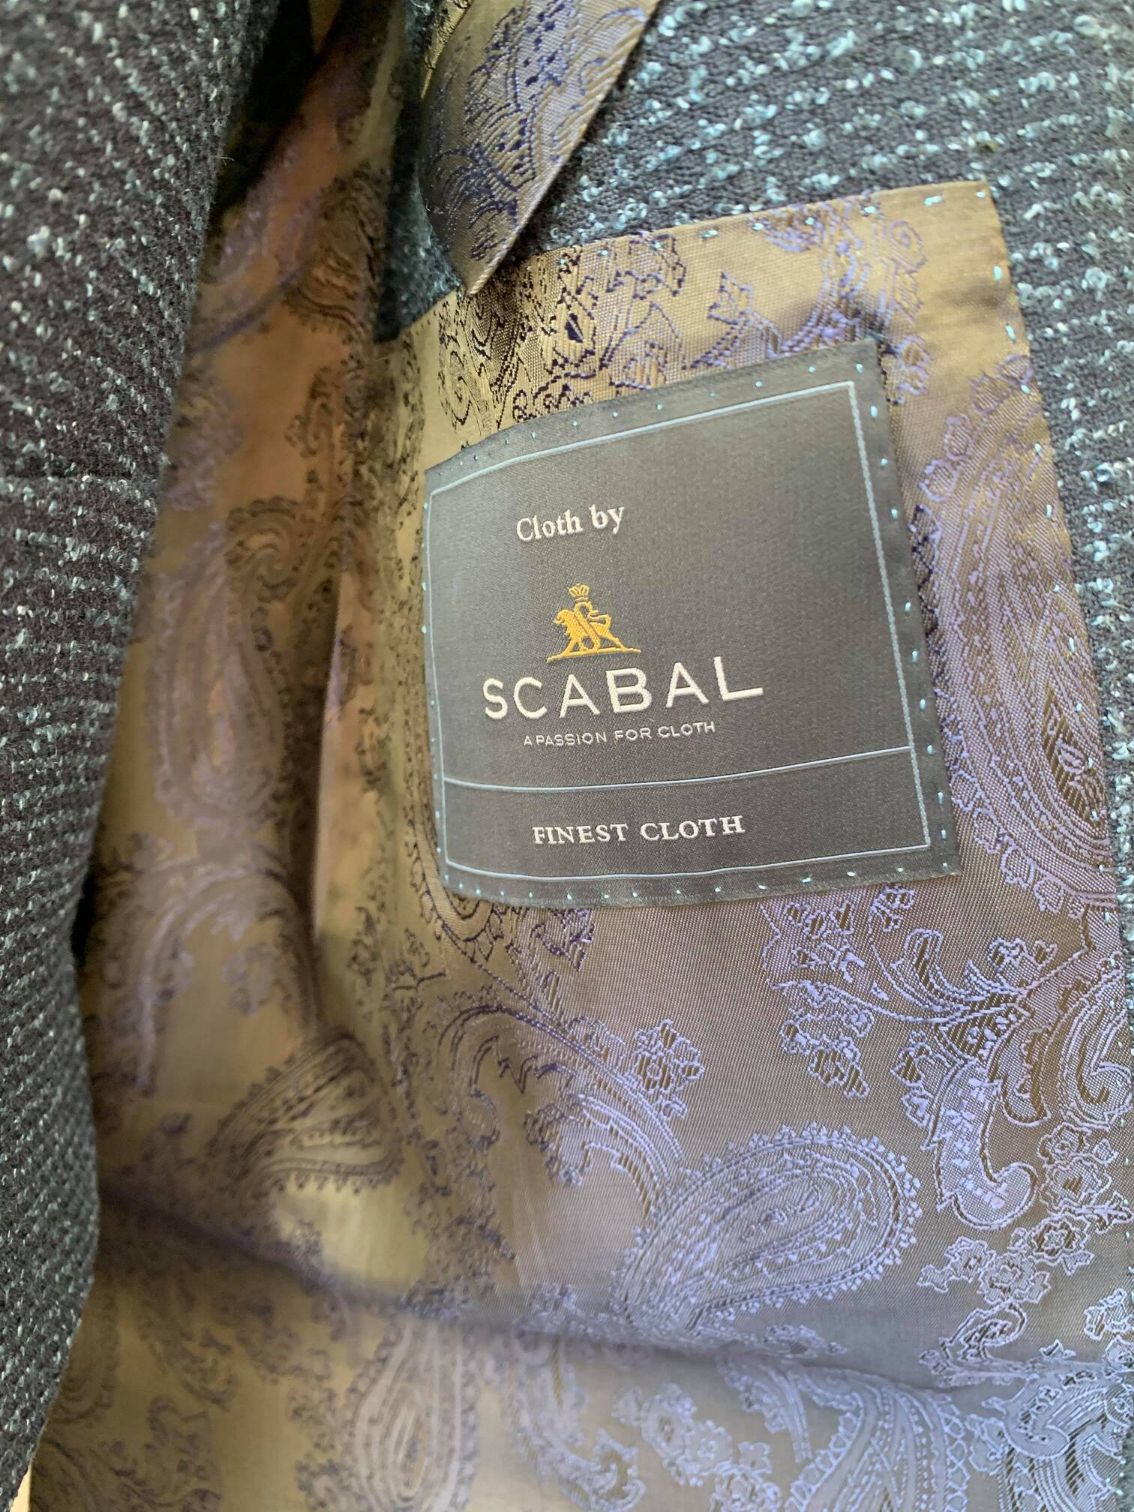 Inside of a jacket with Scabal label